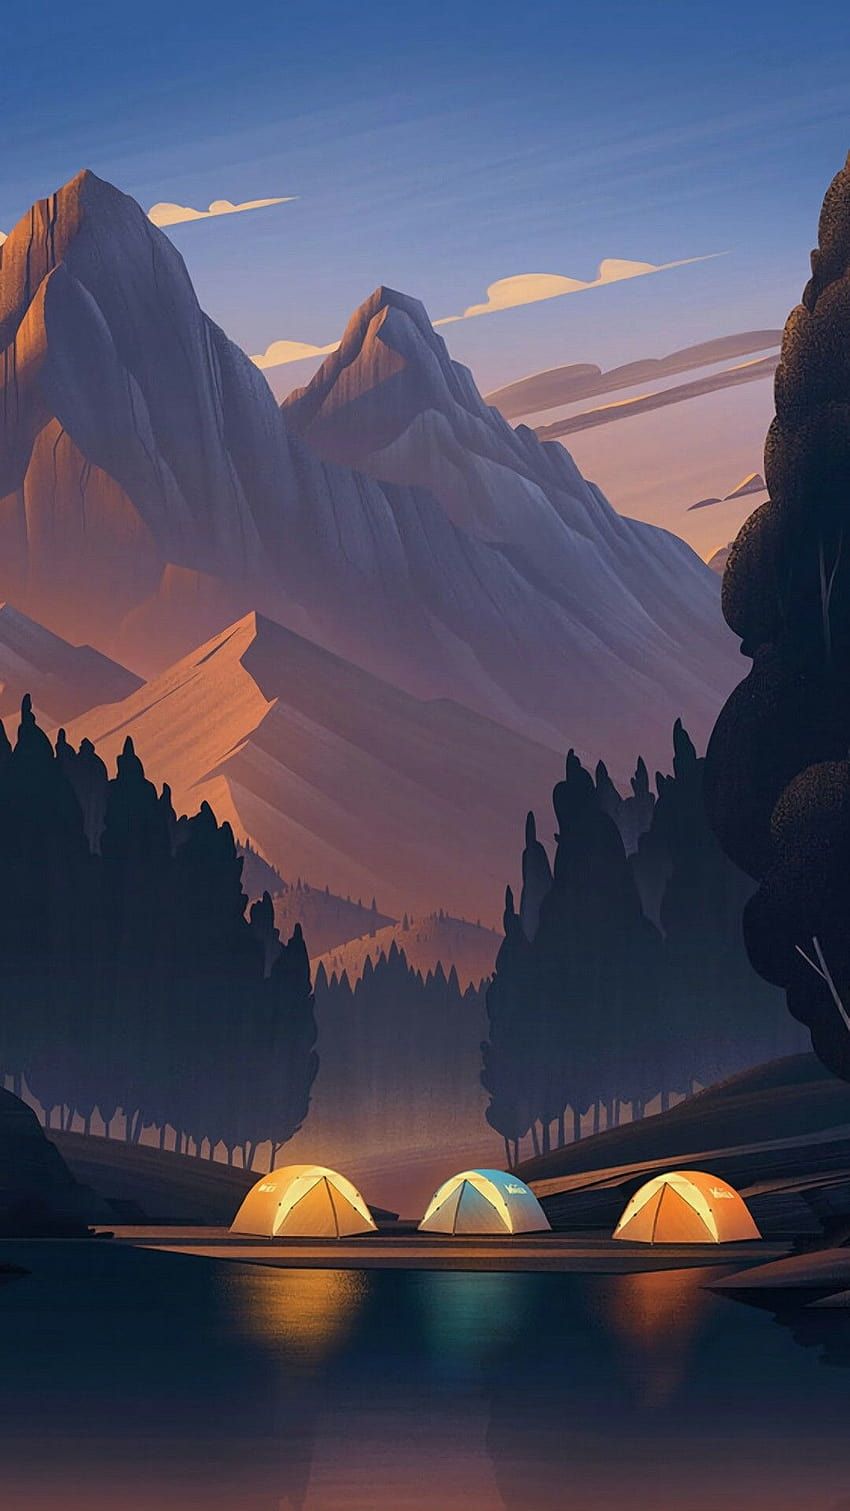 A painting of three tents pitched in a valley between two mountains - Low poly